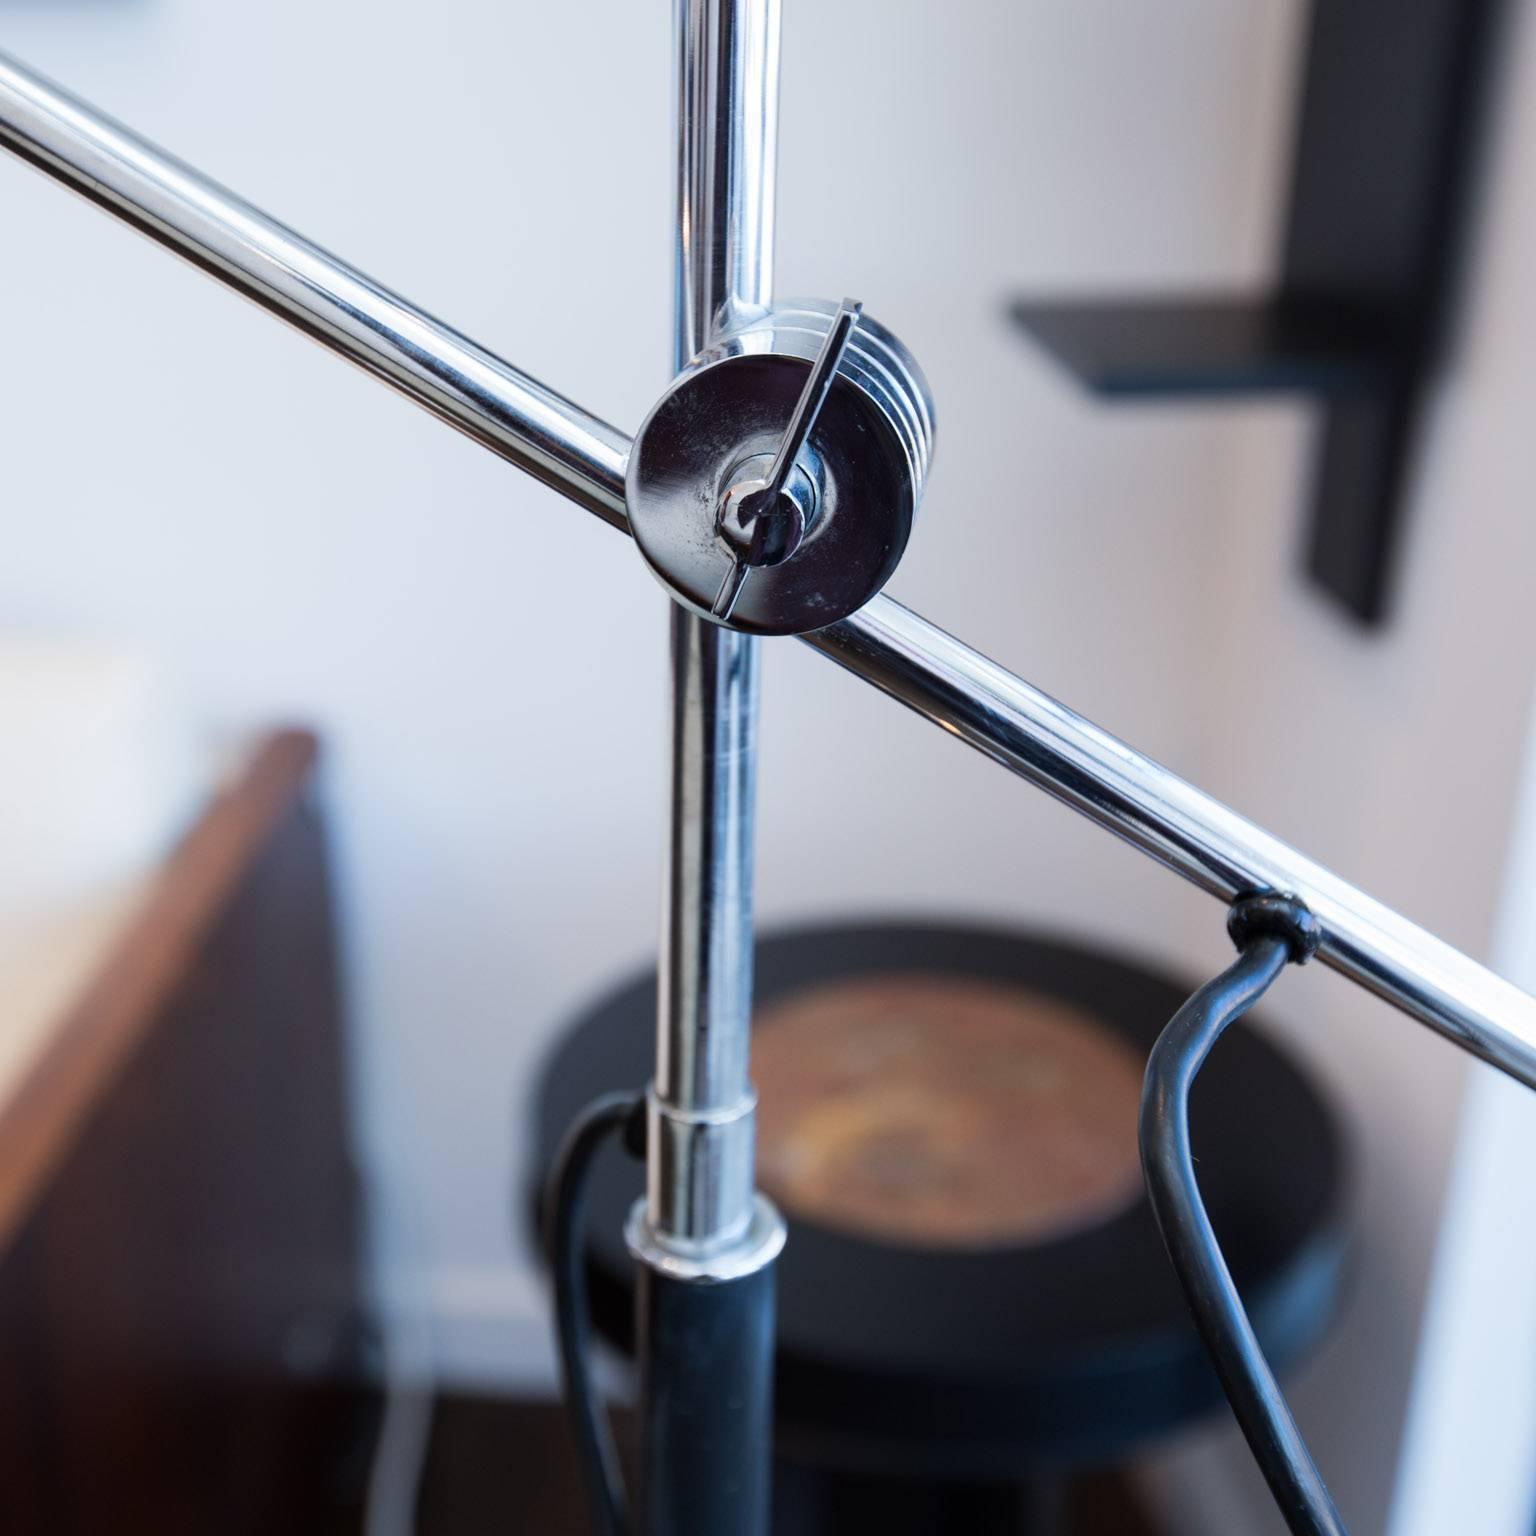 A modern, heavier and higher quality version of the Sonneman or Kovacs orbiter lamp. Black leather-wrapped counter balance and black painted column with chrome arms and tri-leg base.